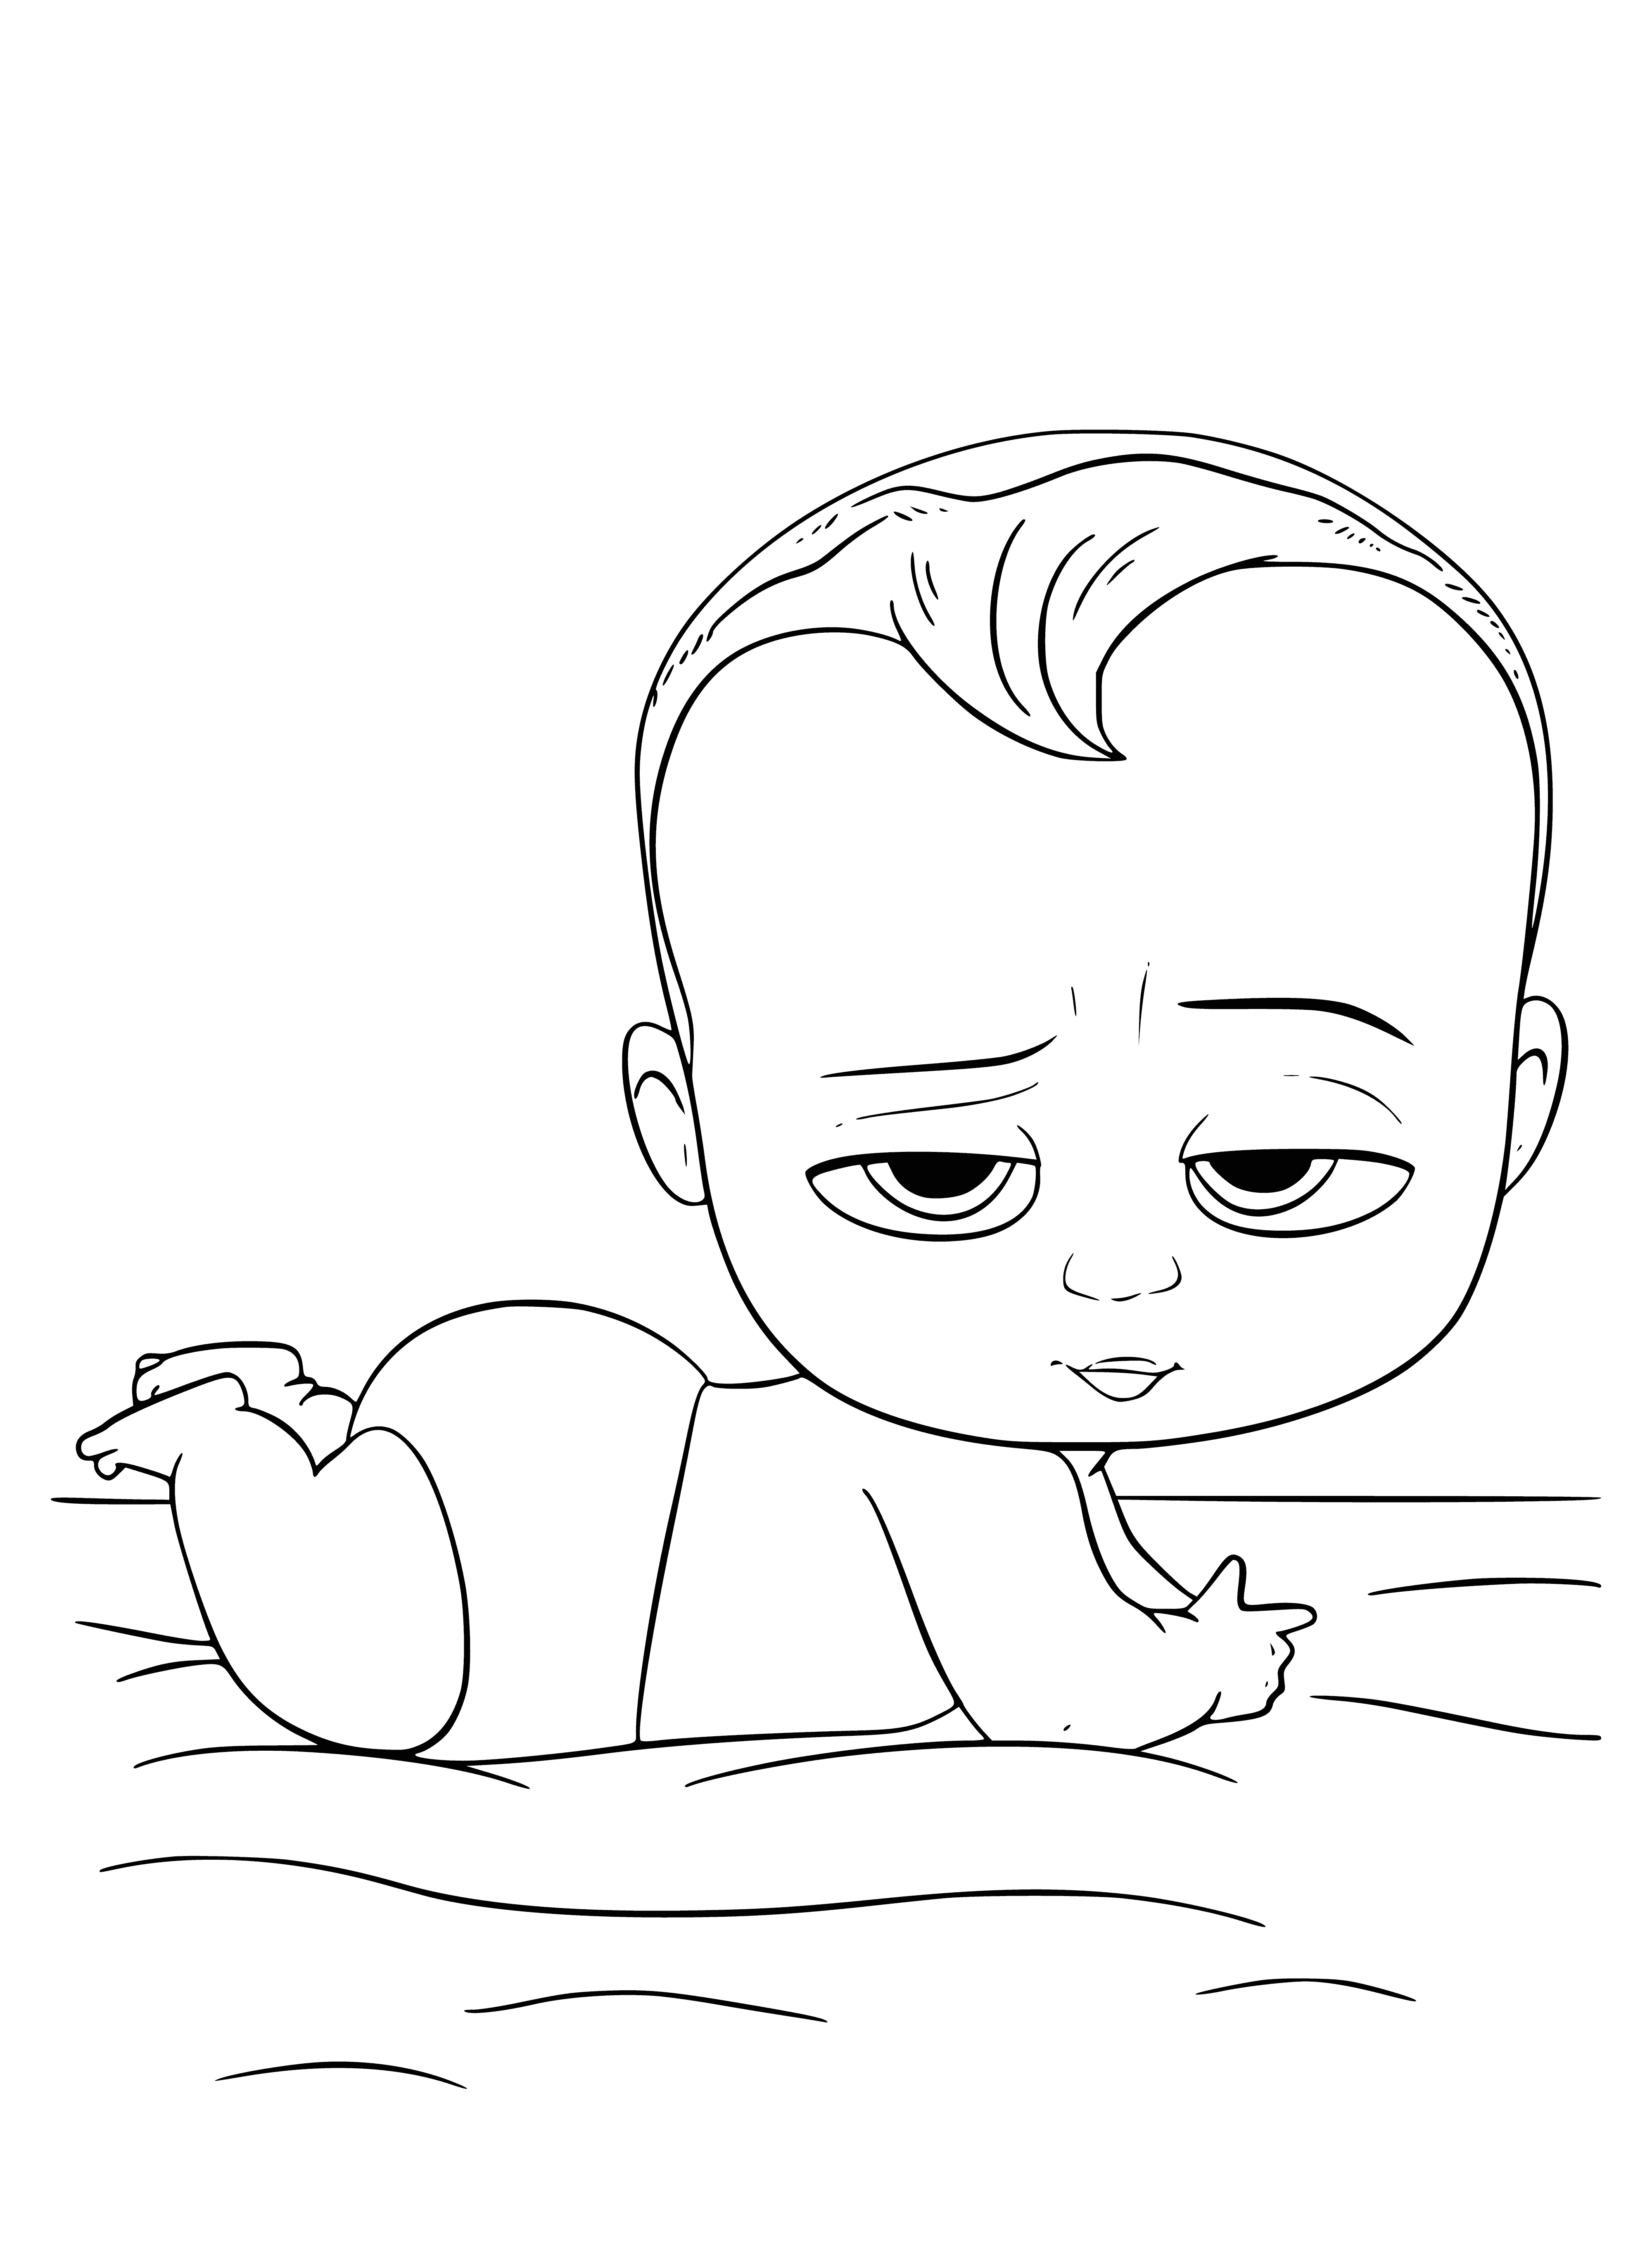 coloring page: Baby in business suit, serious expression, holding papers and briefcase, sitting in armchair.